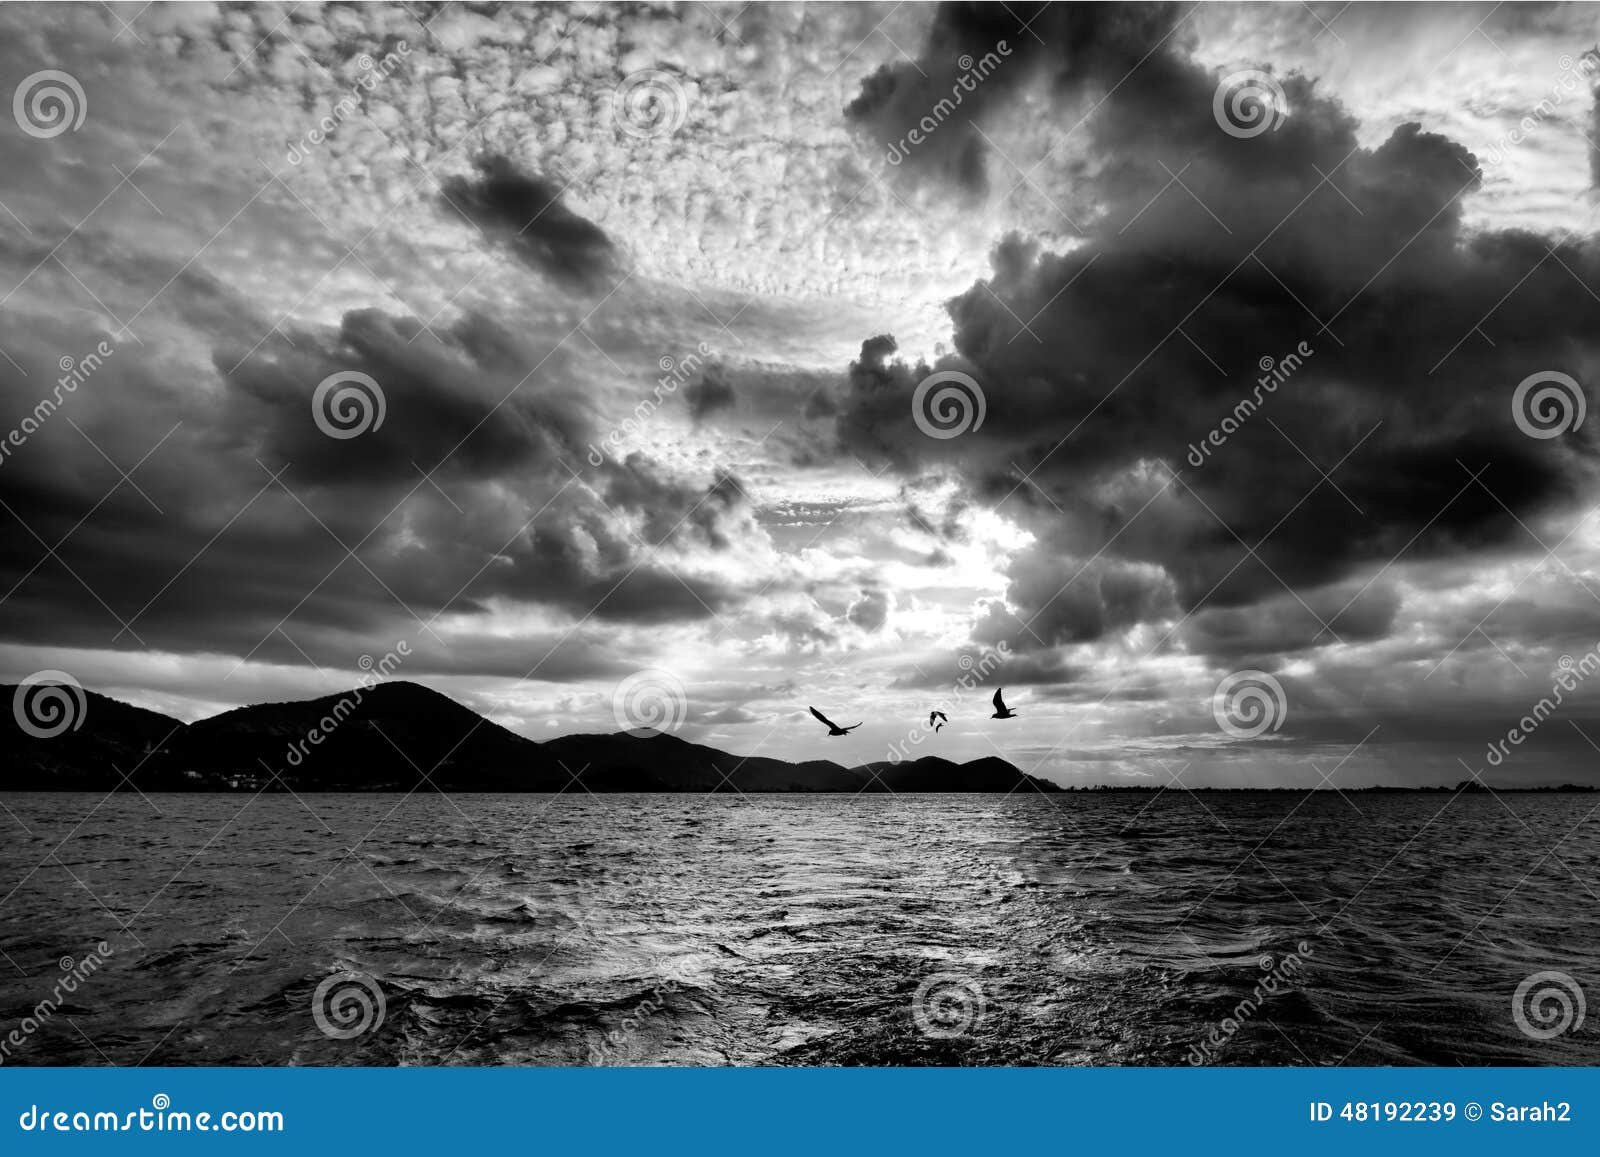 Stormy sea shore with seagulls - black and white monochrome. Dramatic sky.View from boat.